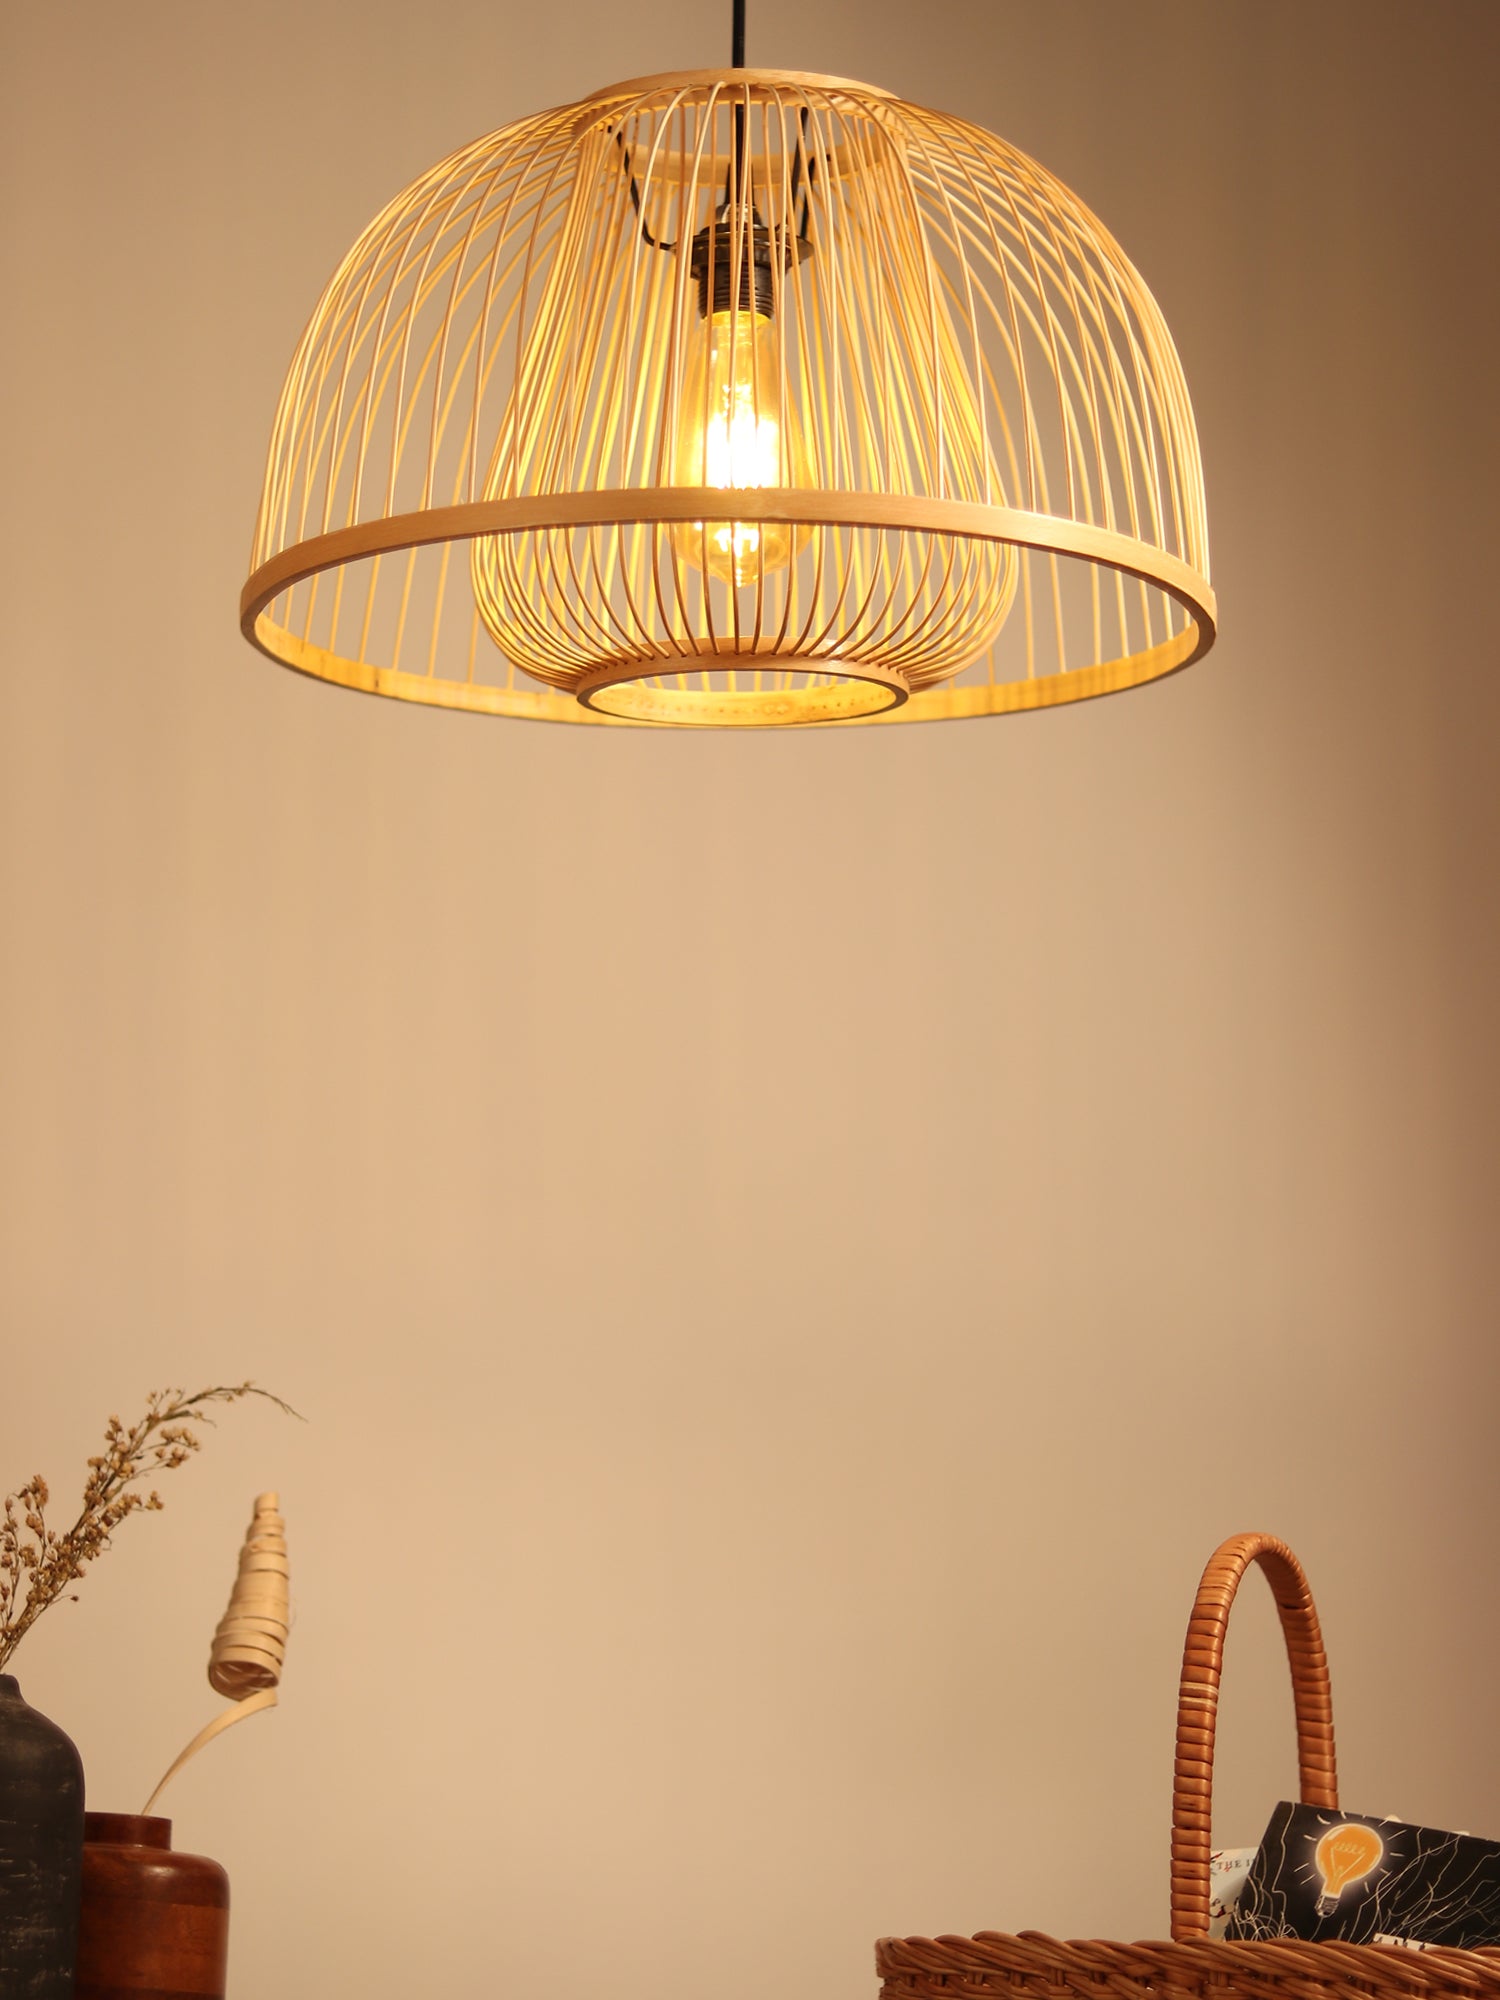 Buy Online Bamboo Lampshades 